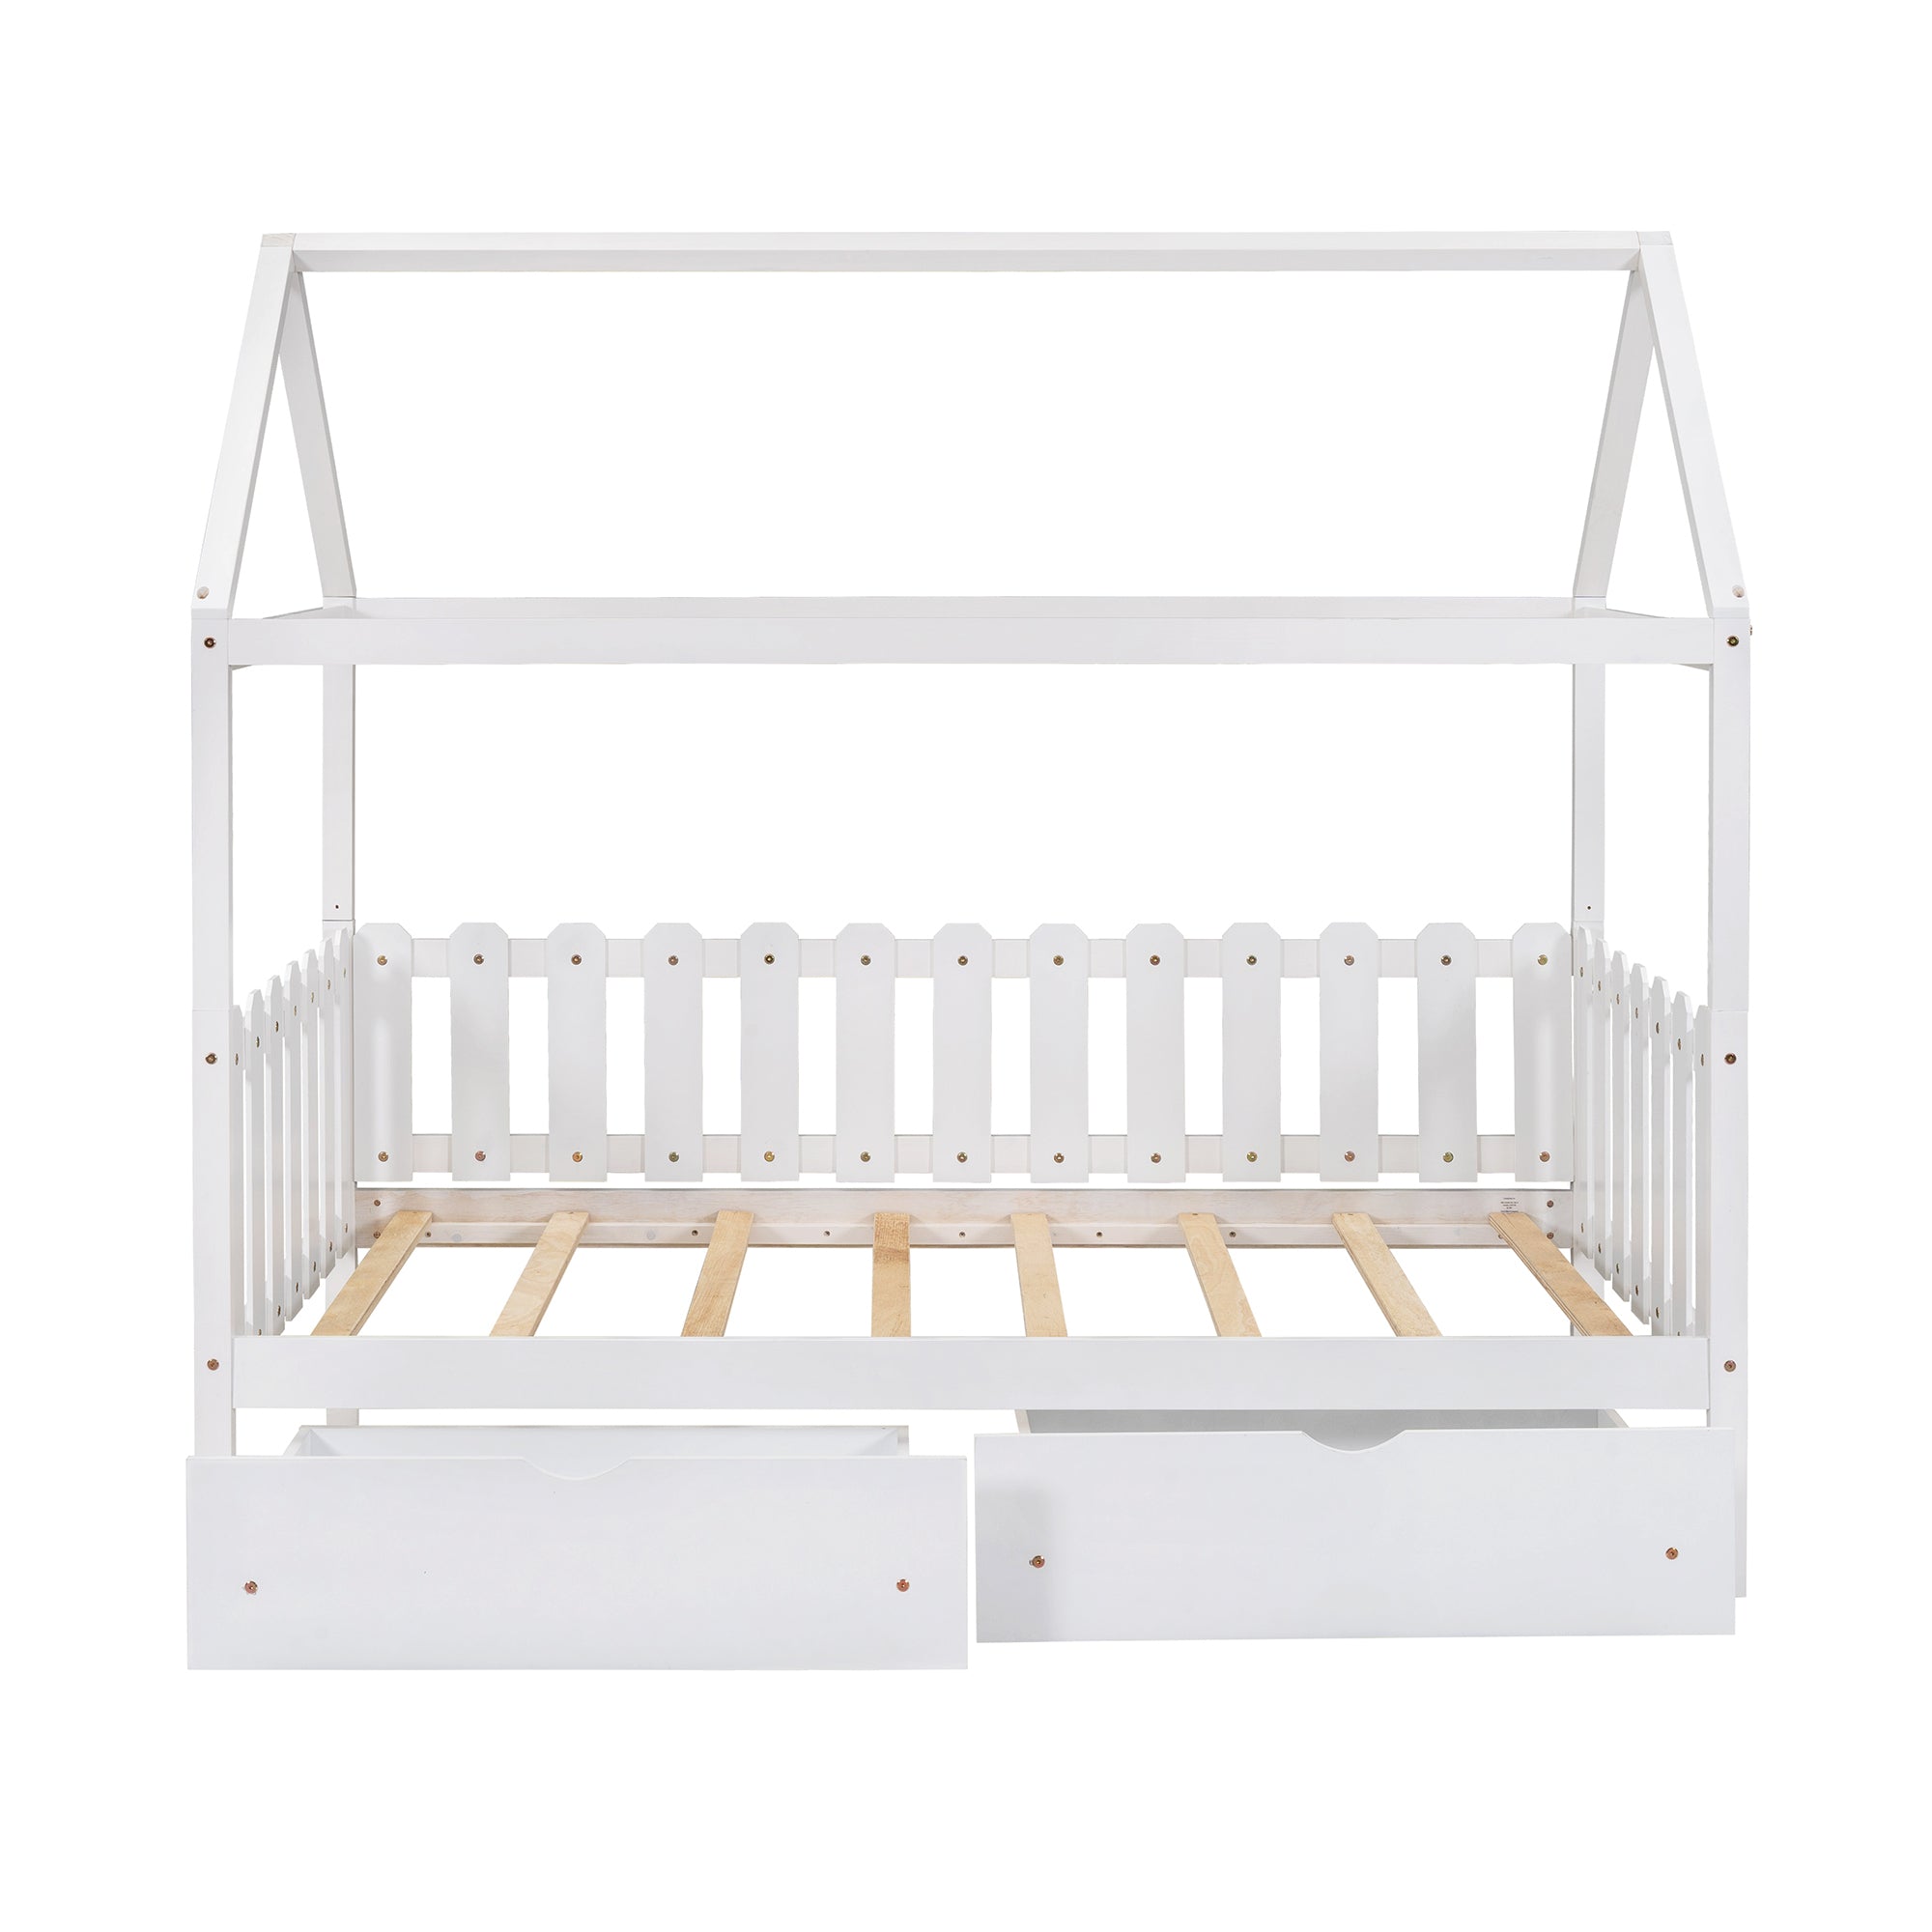 Twin Size House Bed with Drawers (White)